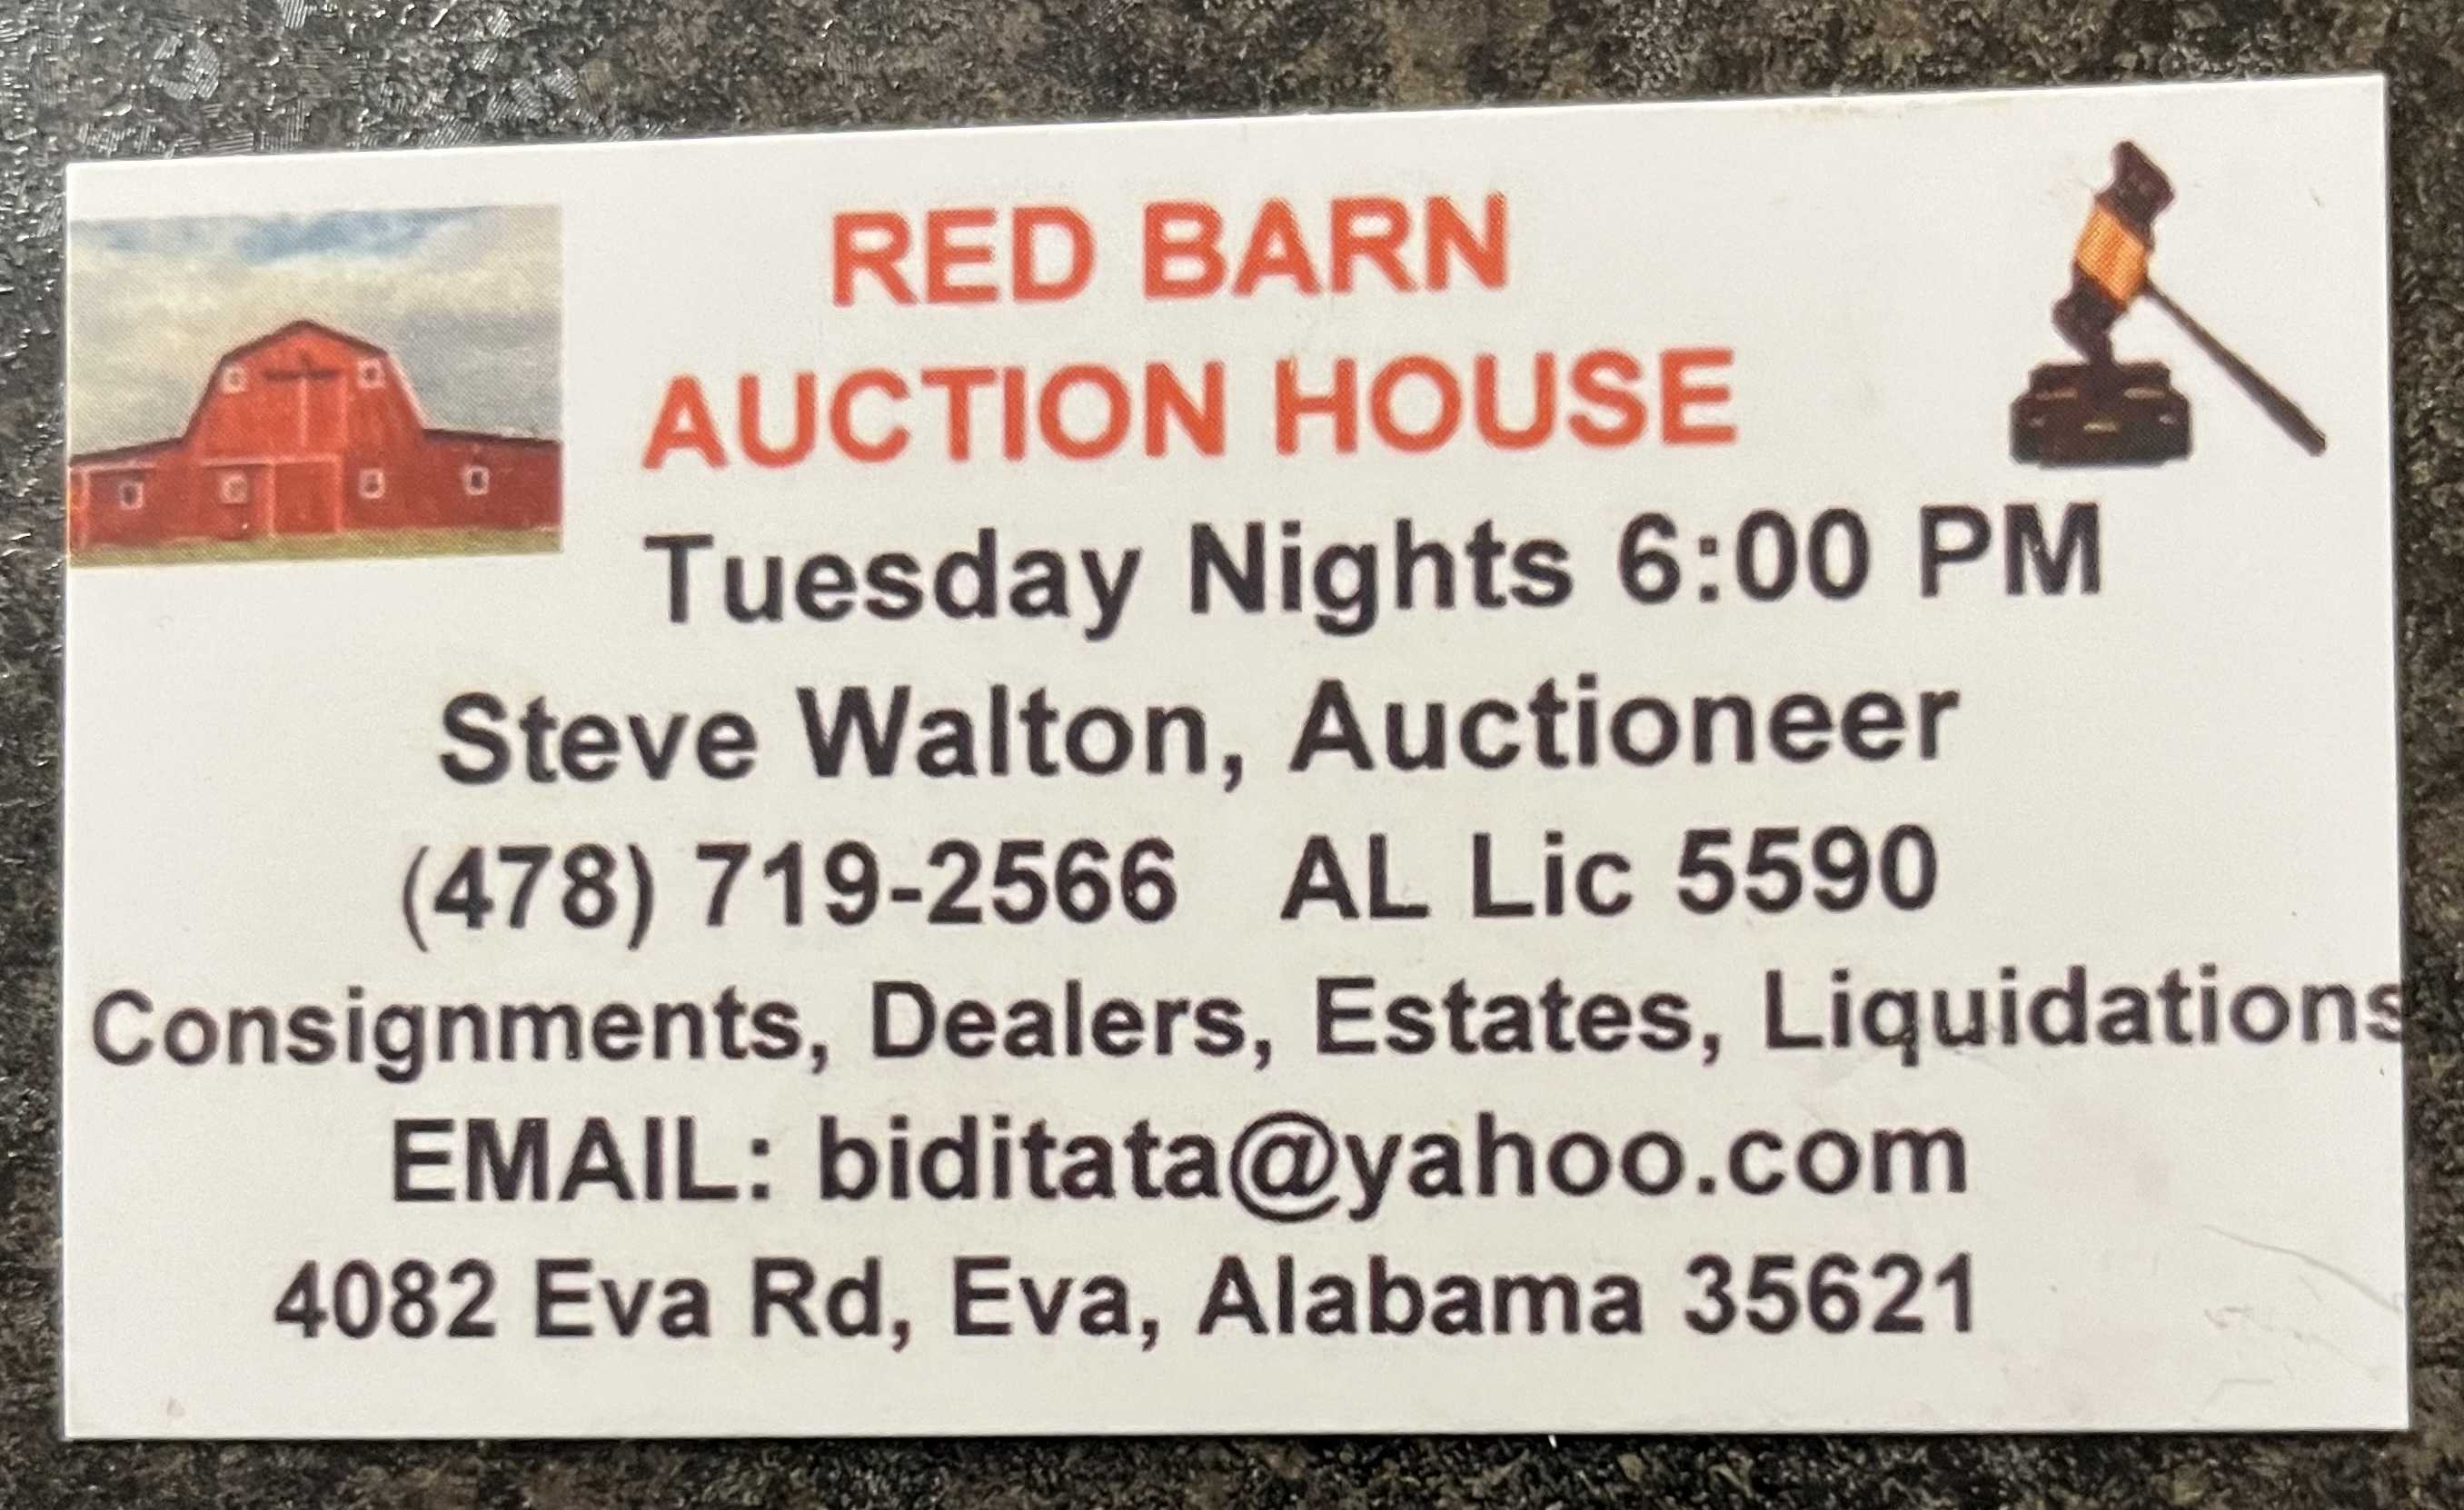 Auction teaser for Red Barn Auction House